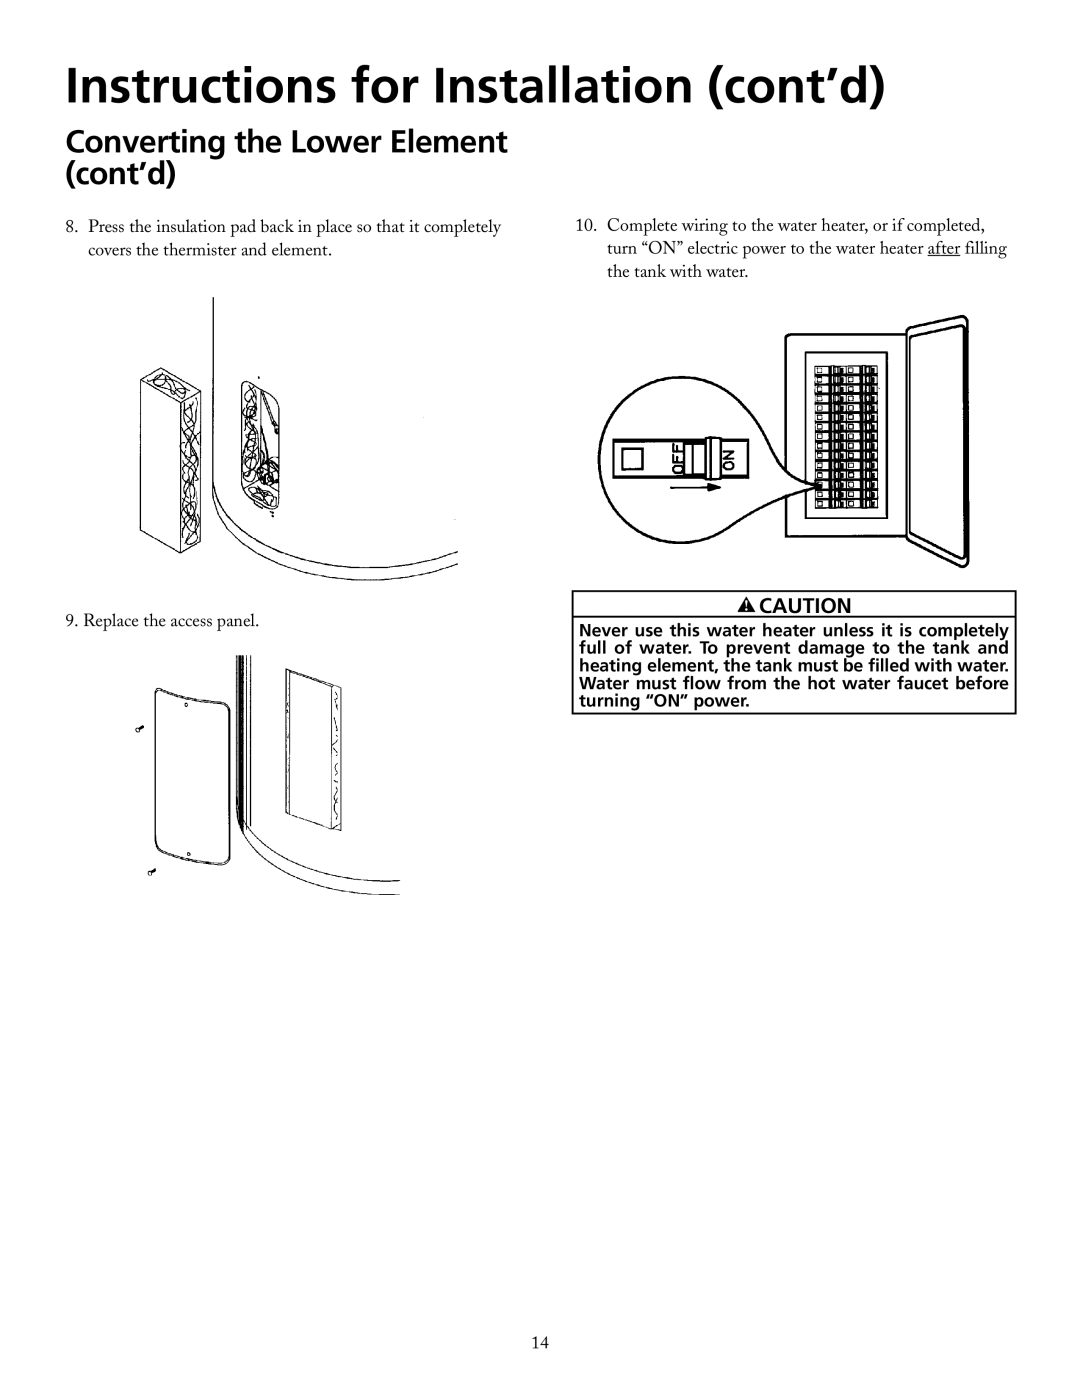 Maytag HRE21250PC Instructions for Installation cont’d, Converting the Lower Element cont’d, Replace the access panel 